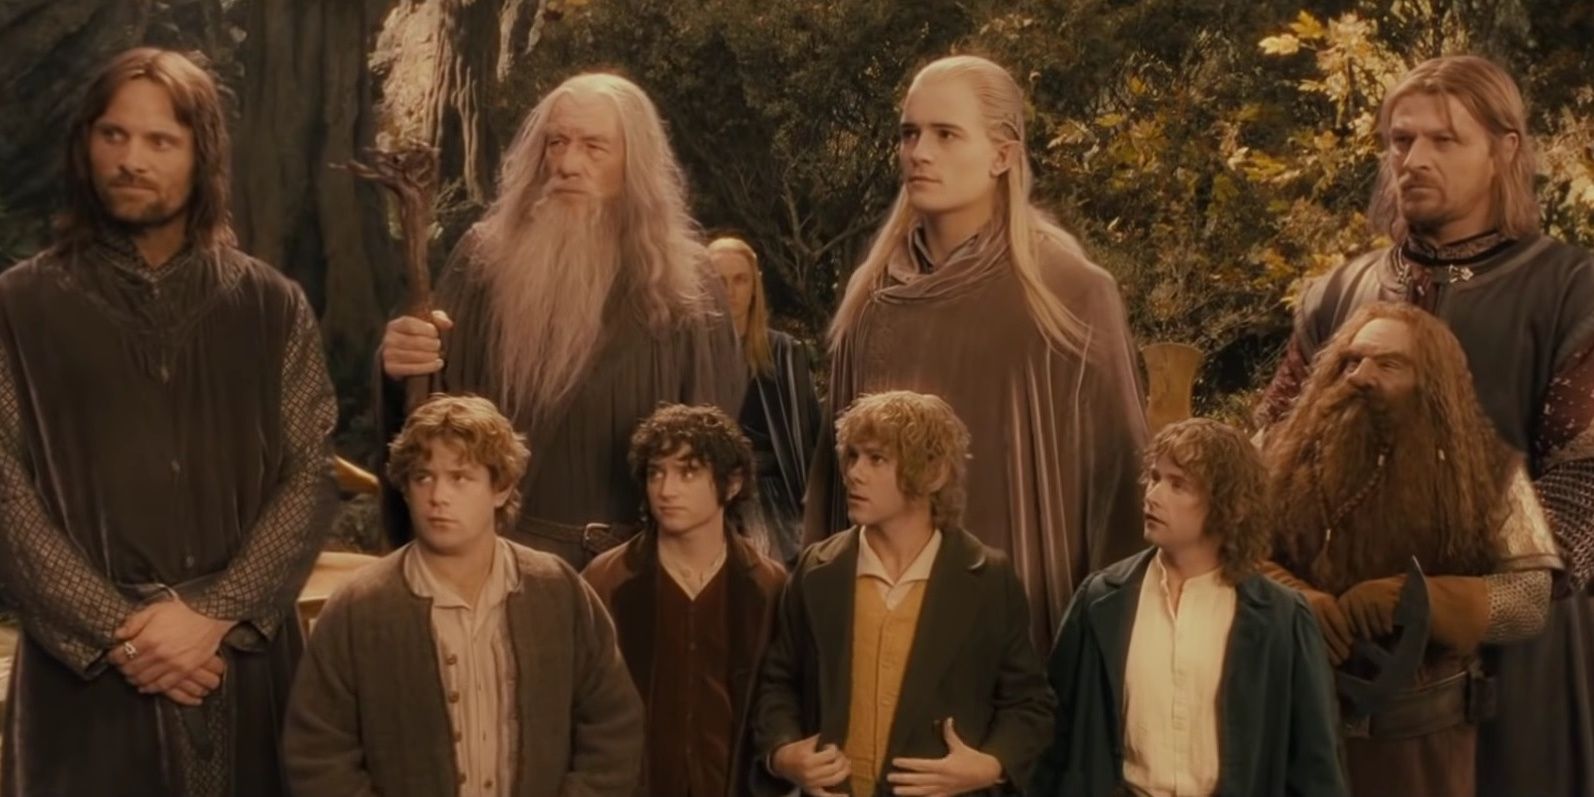 The literal Fellowship of the Ring in The Fellowship of the Ring